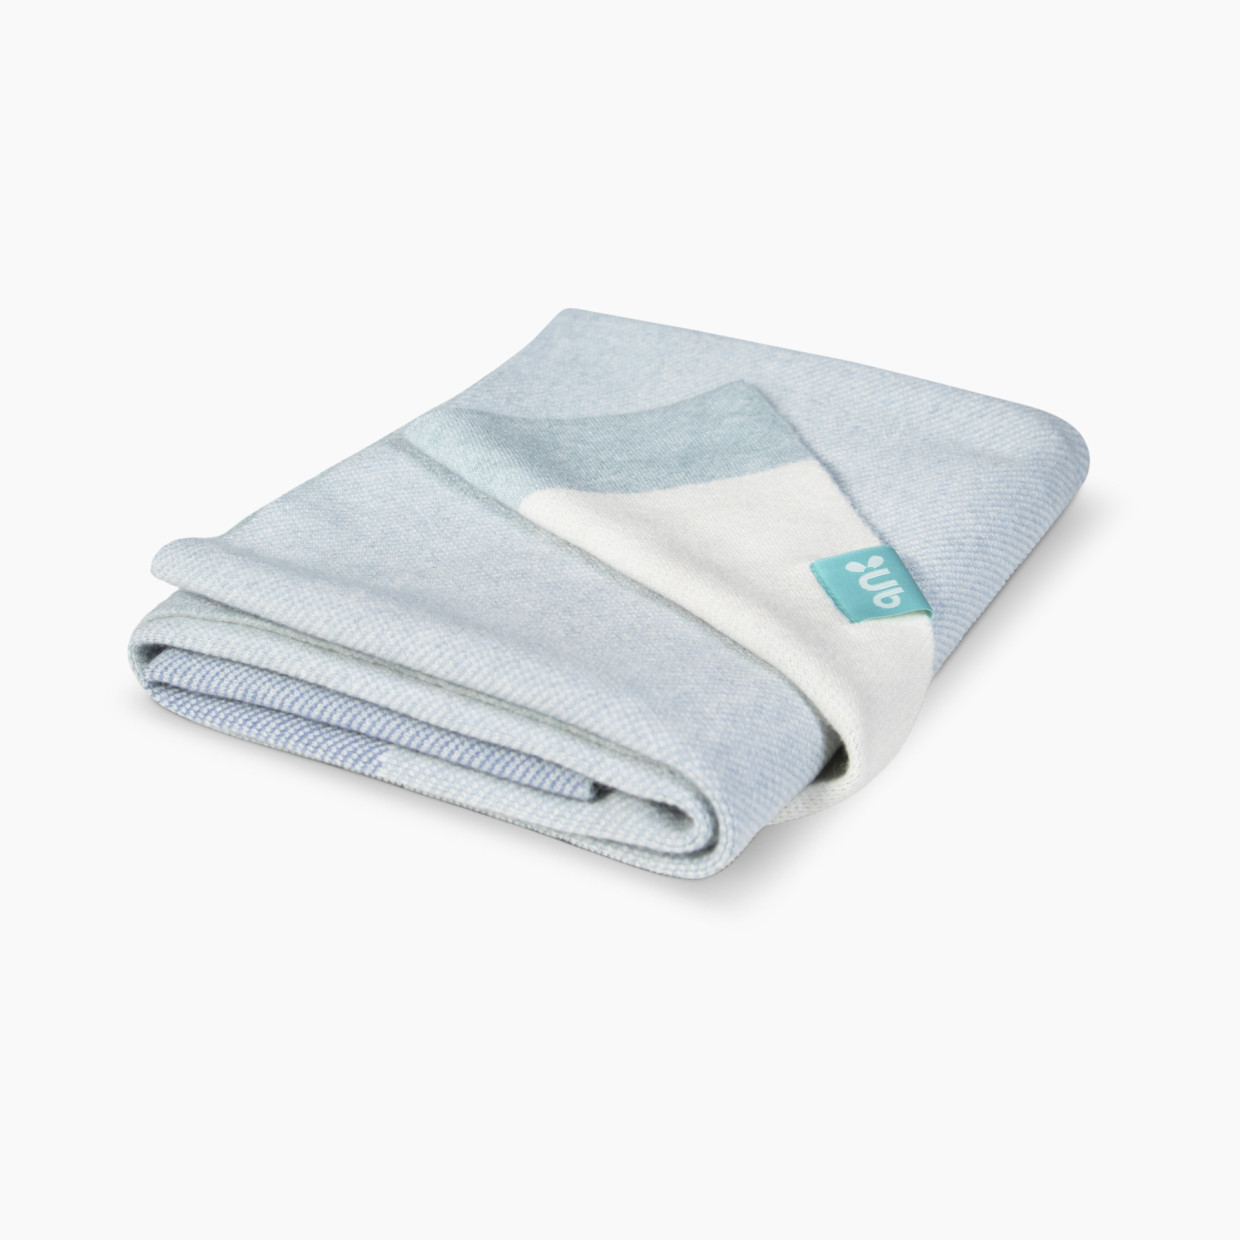 UPPAbaby Knit Blanket - Blue Color Block.